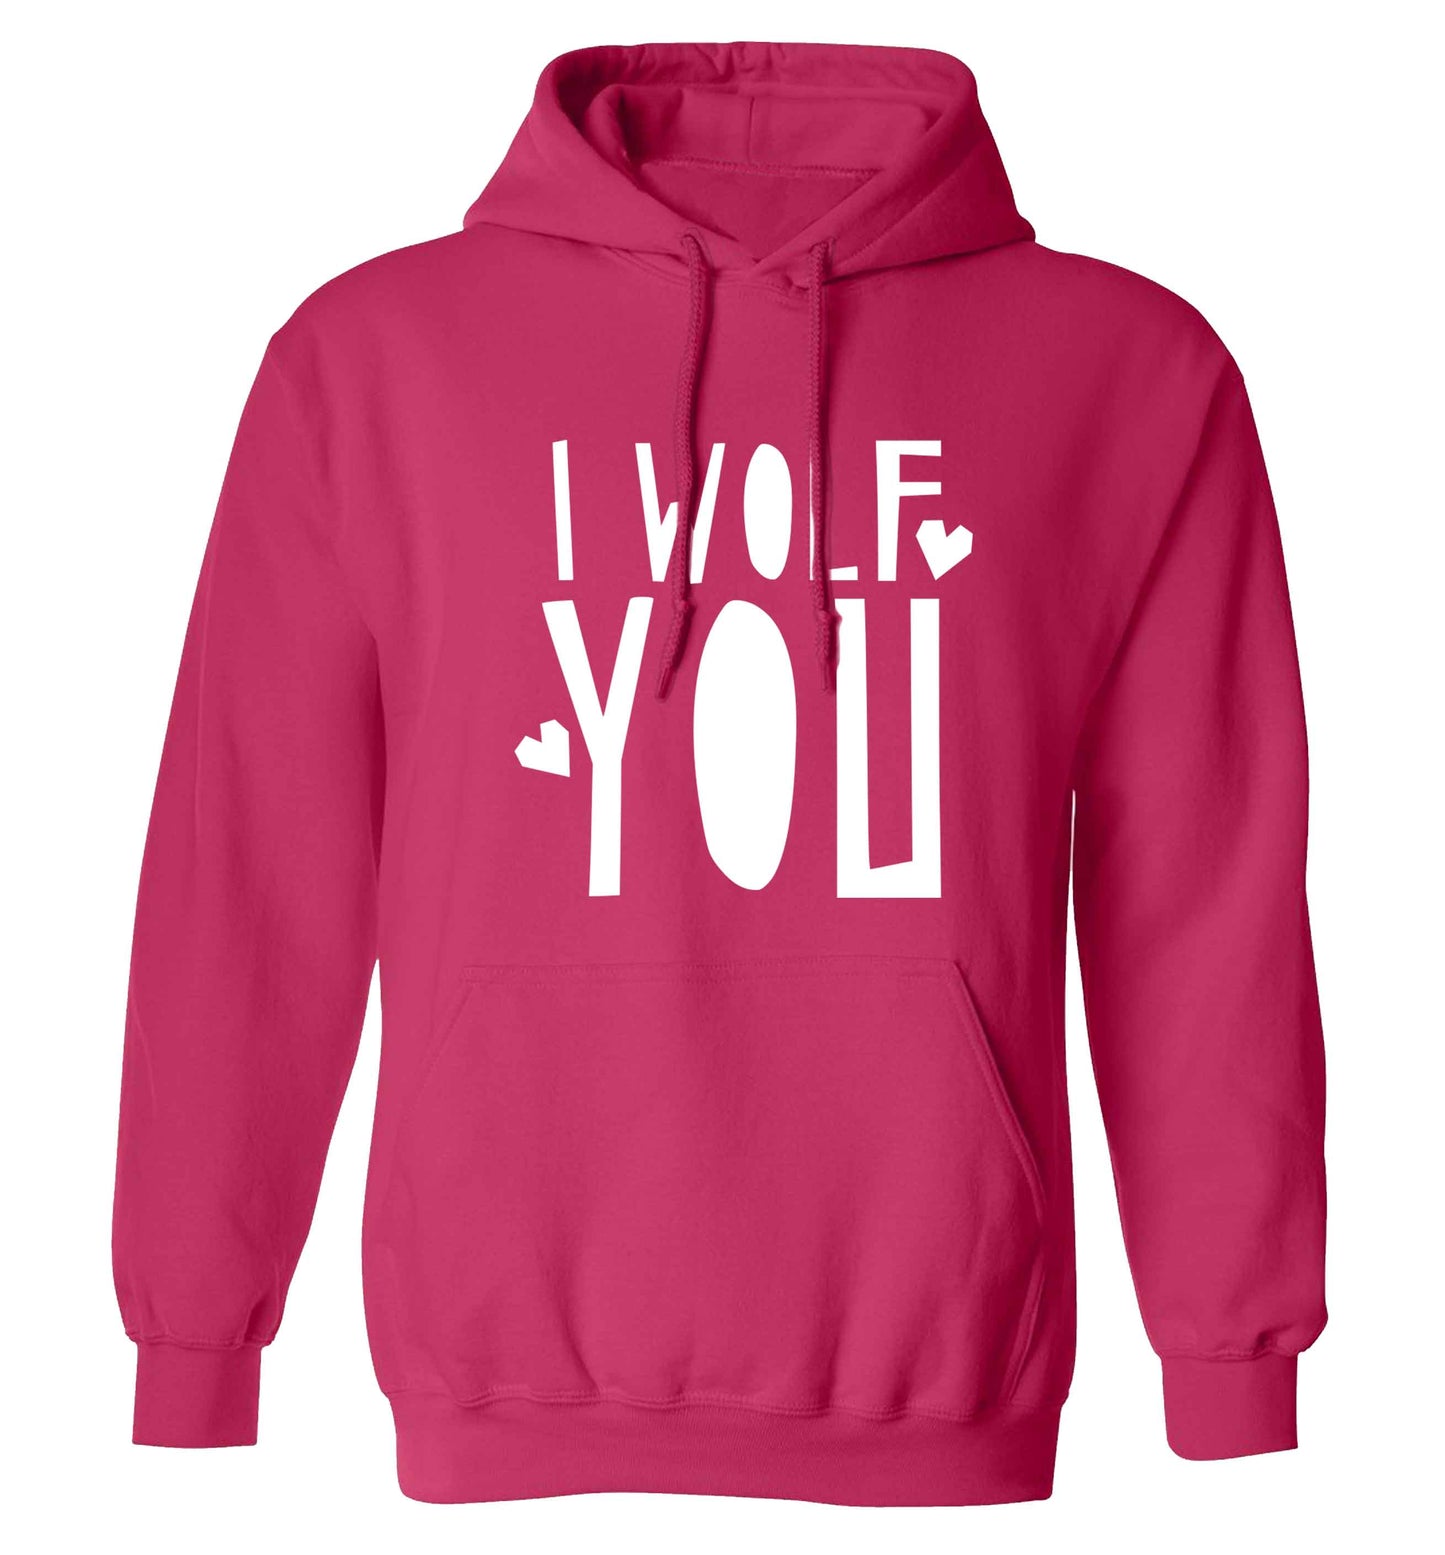 I wolf you adults unisex pink hoodie 2XL